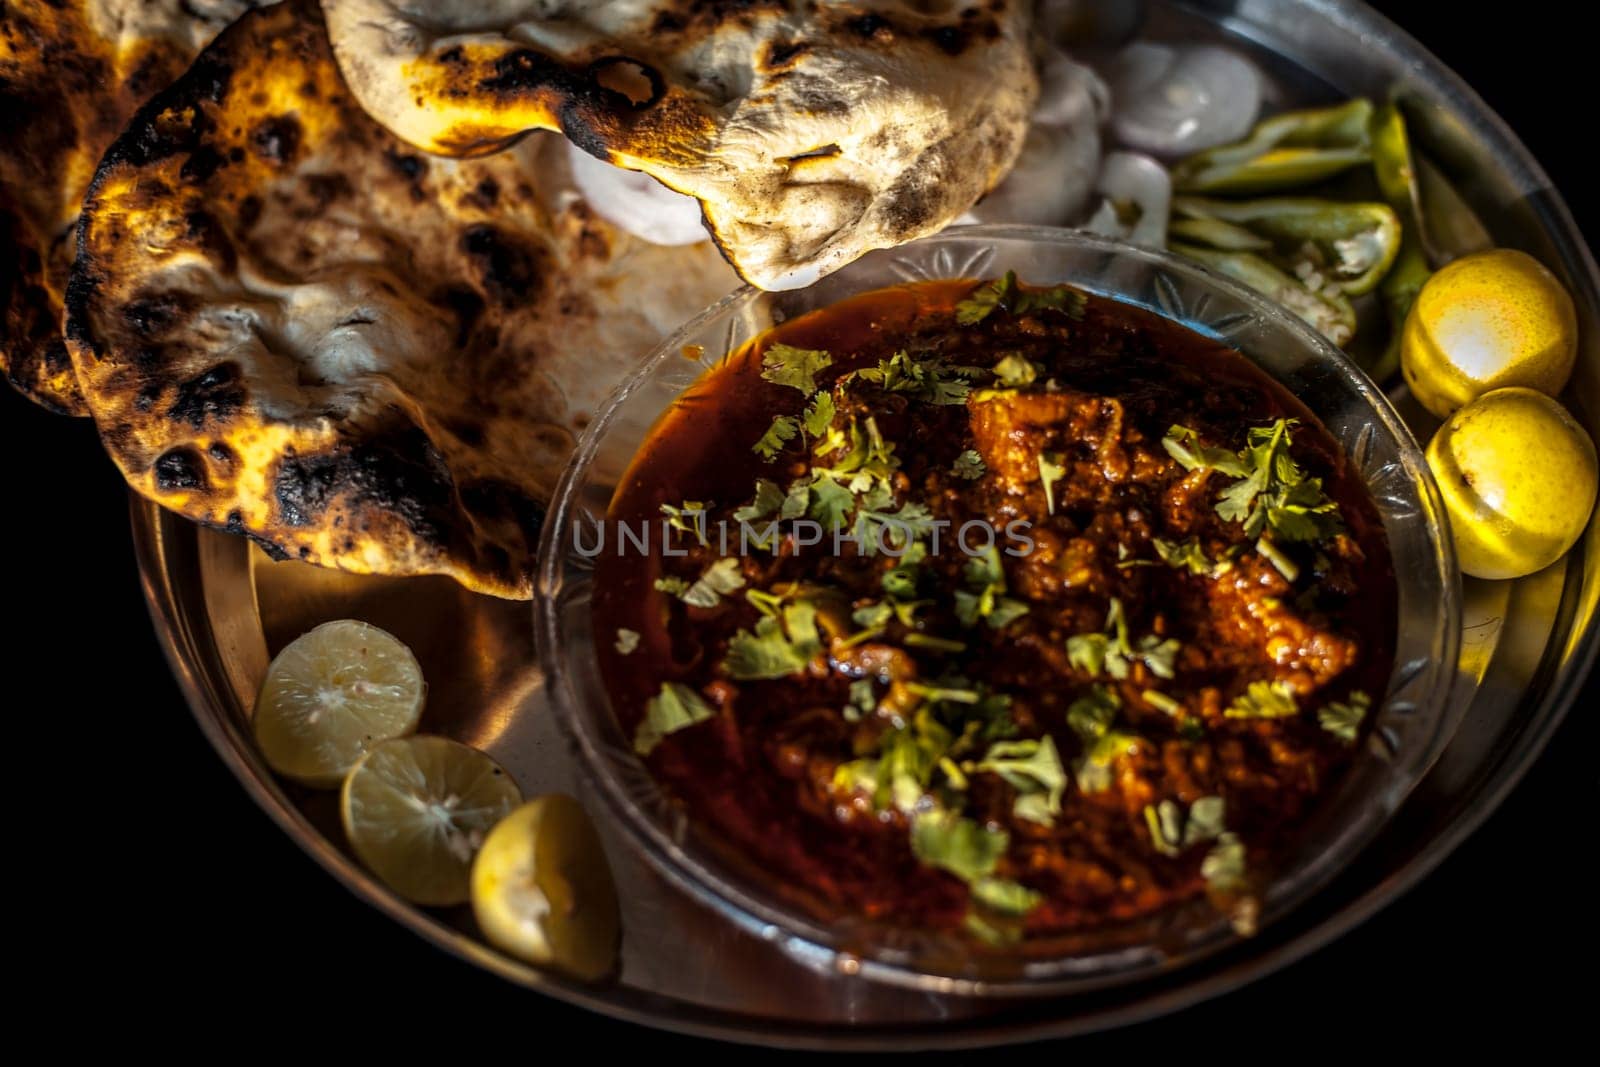 Shot of Achari Chicken along with tandoori roti with it on a serving plate with some chilies, onions, and lemons.